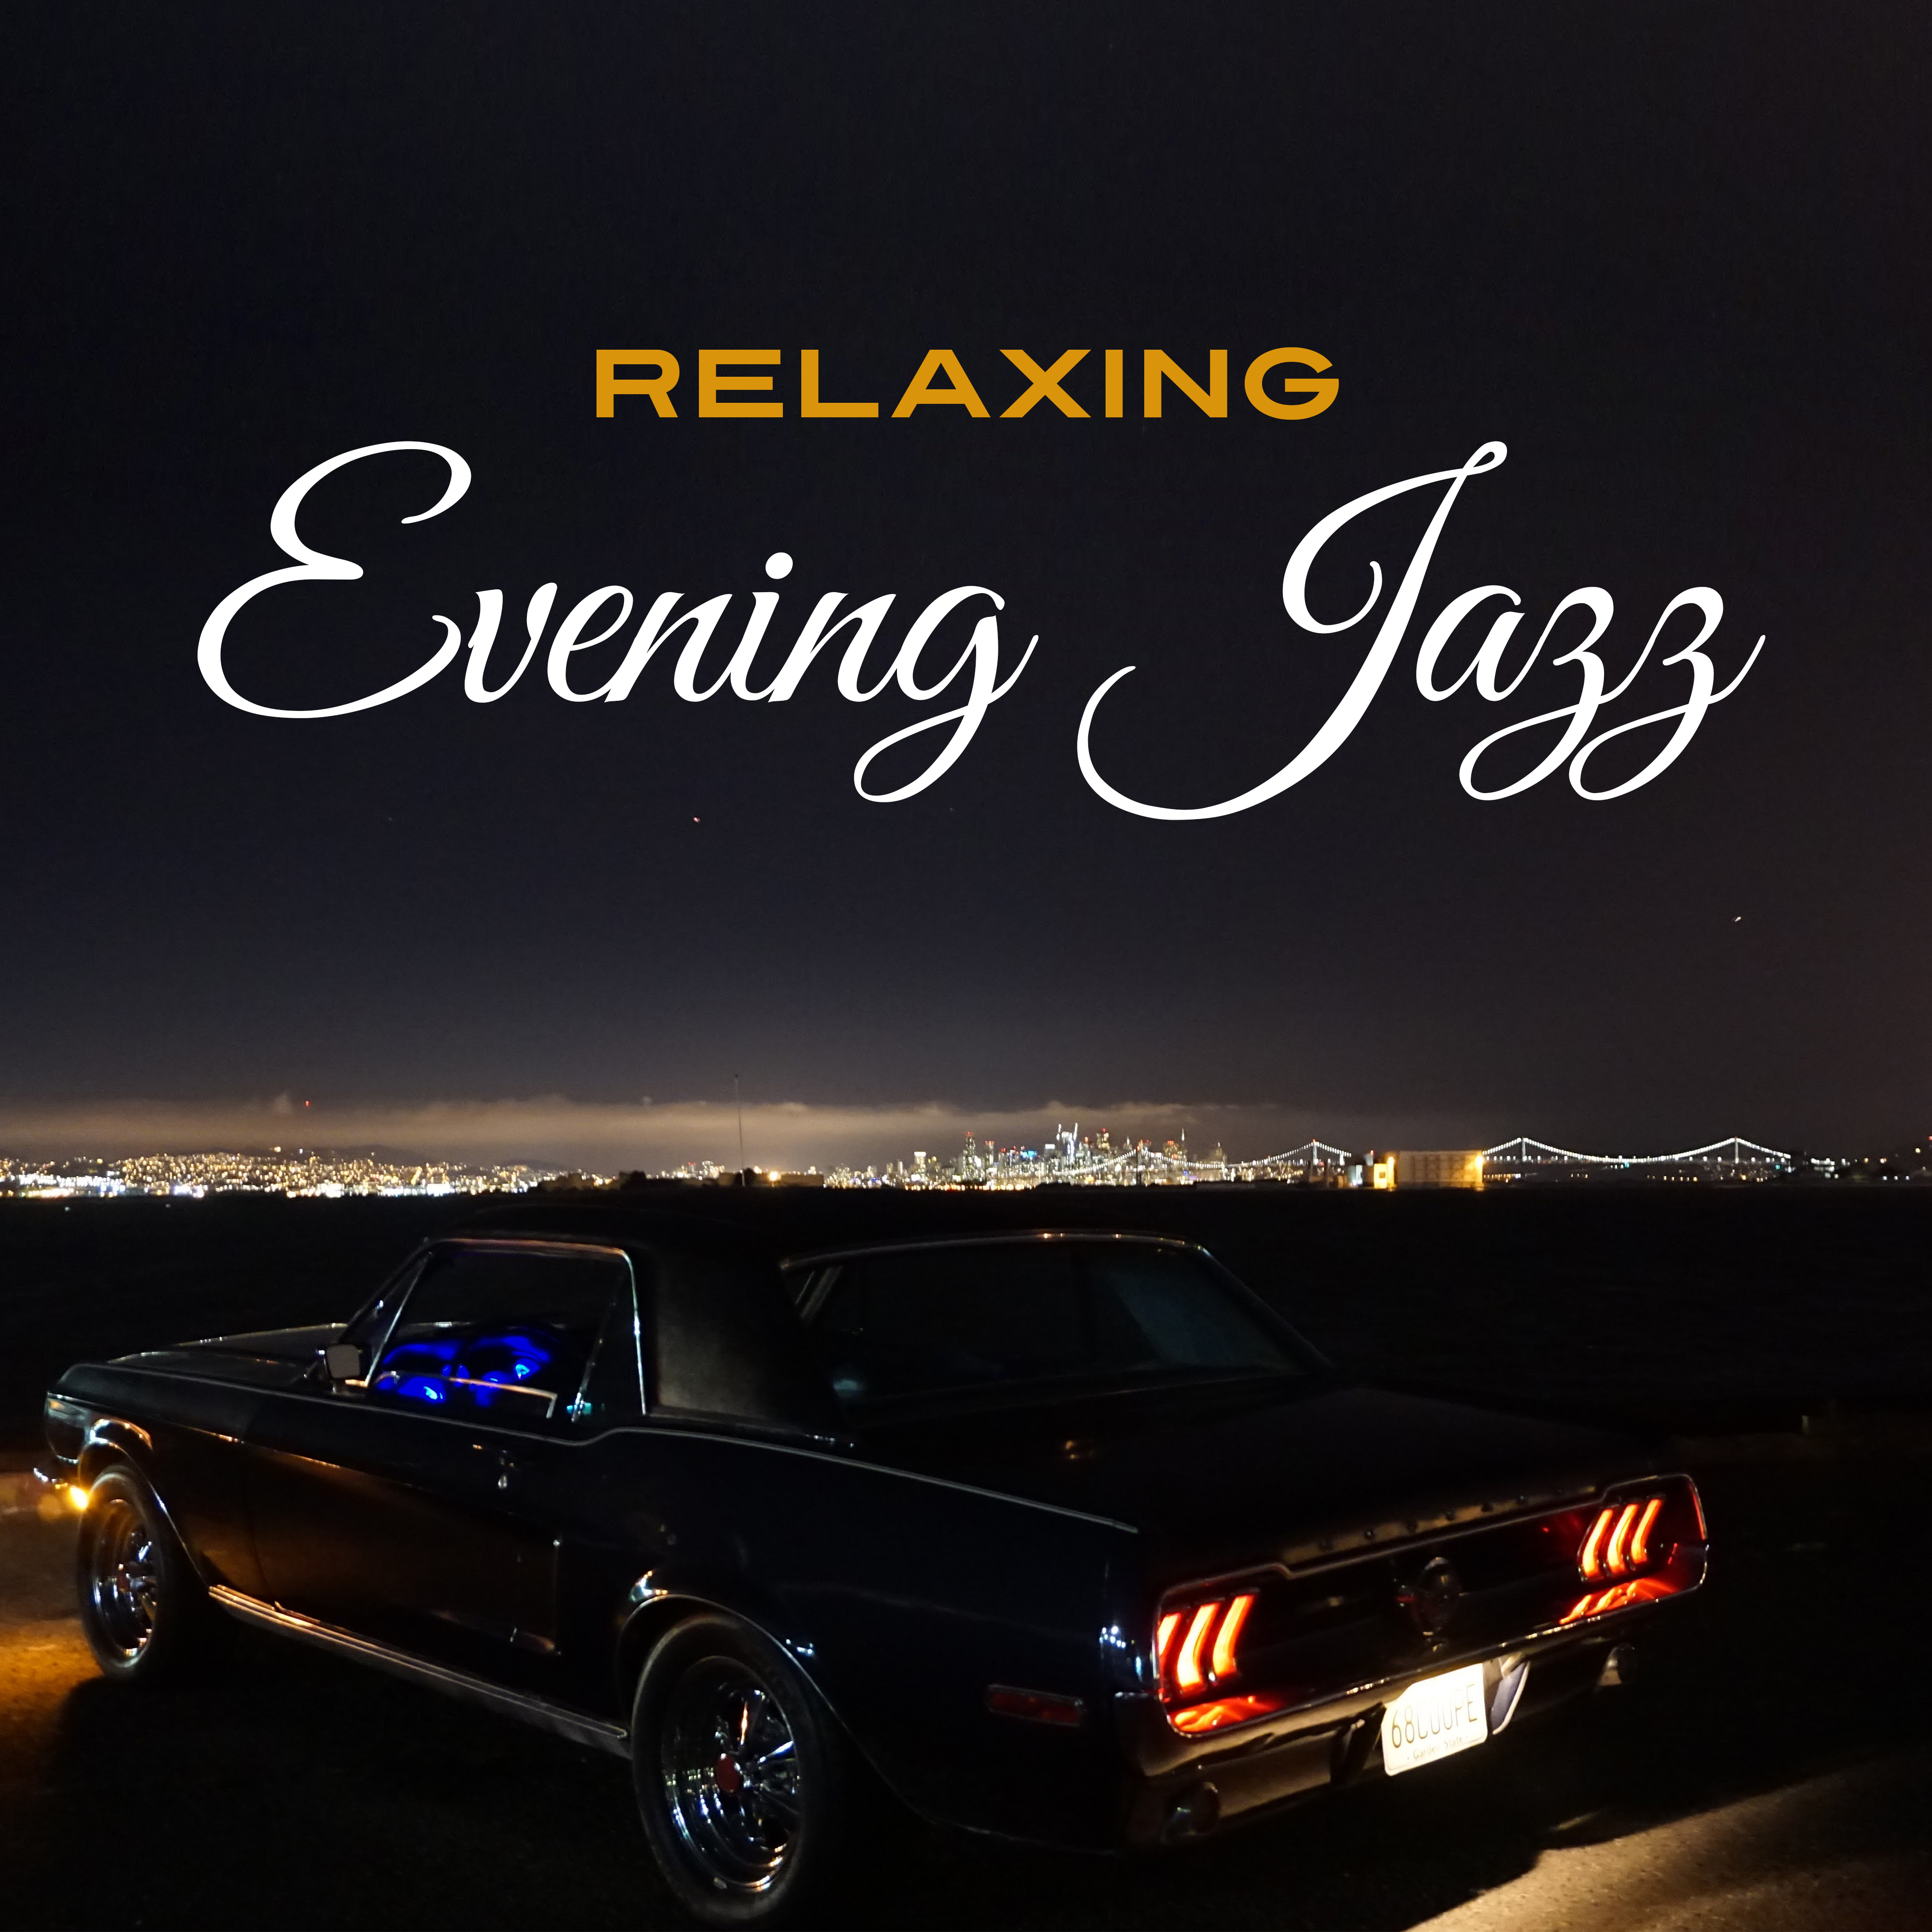 Relaxing Evening Jazz  Peaceful Jazz Melodies, Night with Jazz, Calm Down  Rest, Jazz Melodies to Fall Asleep